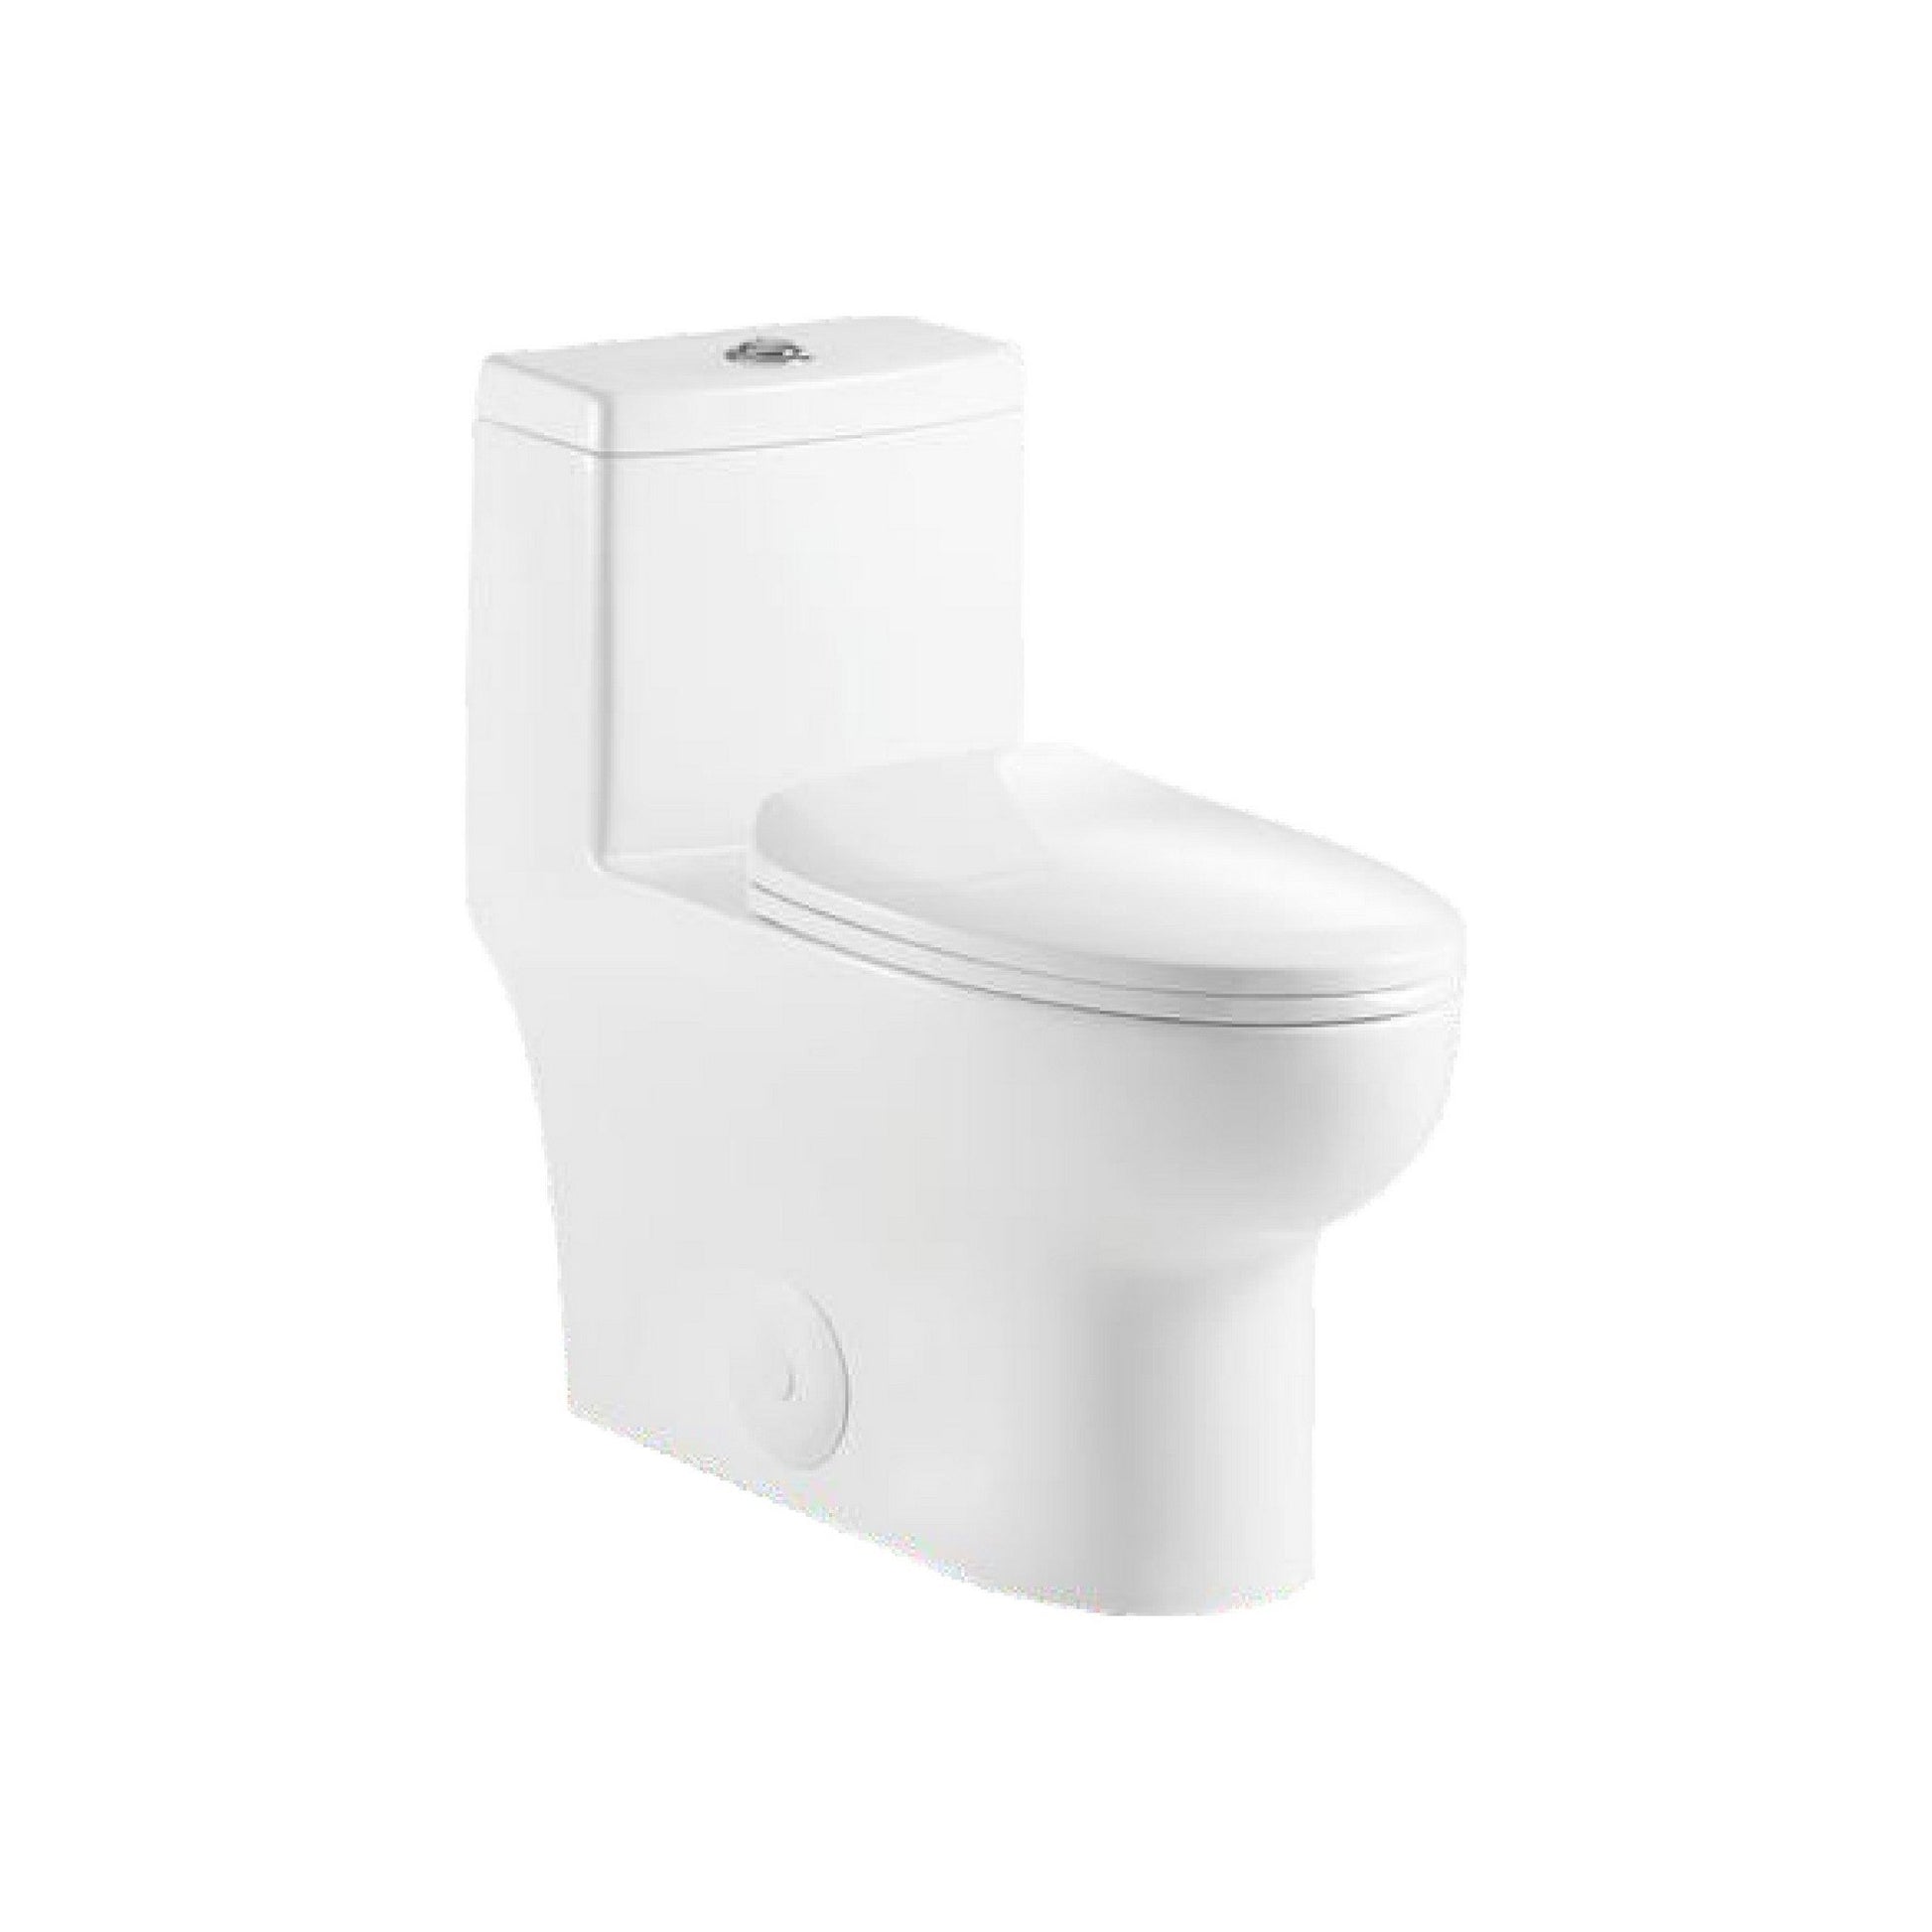 Ratel 14" x 28" White Gloss One-Piece Dual-Flush Floor-Mounted Toilet With Soft-Close Seat